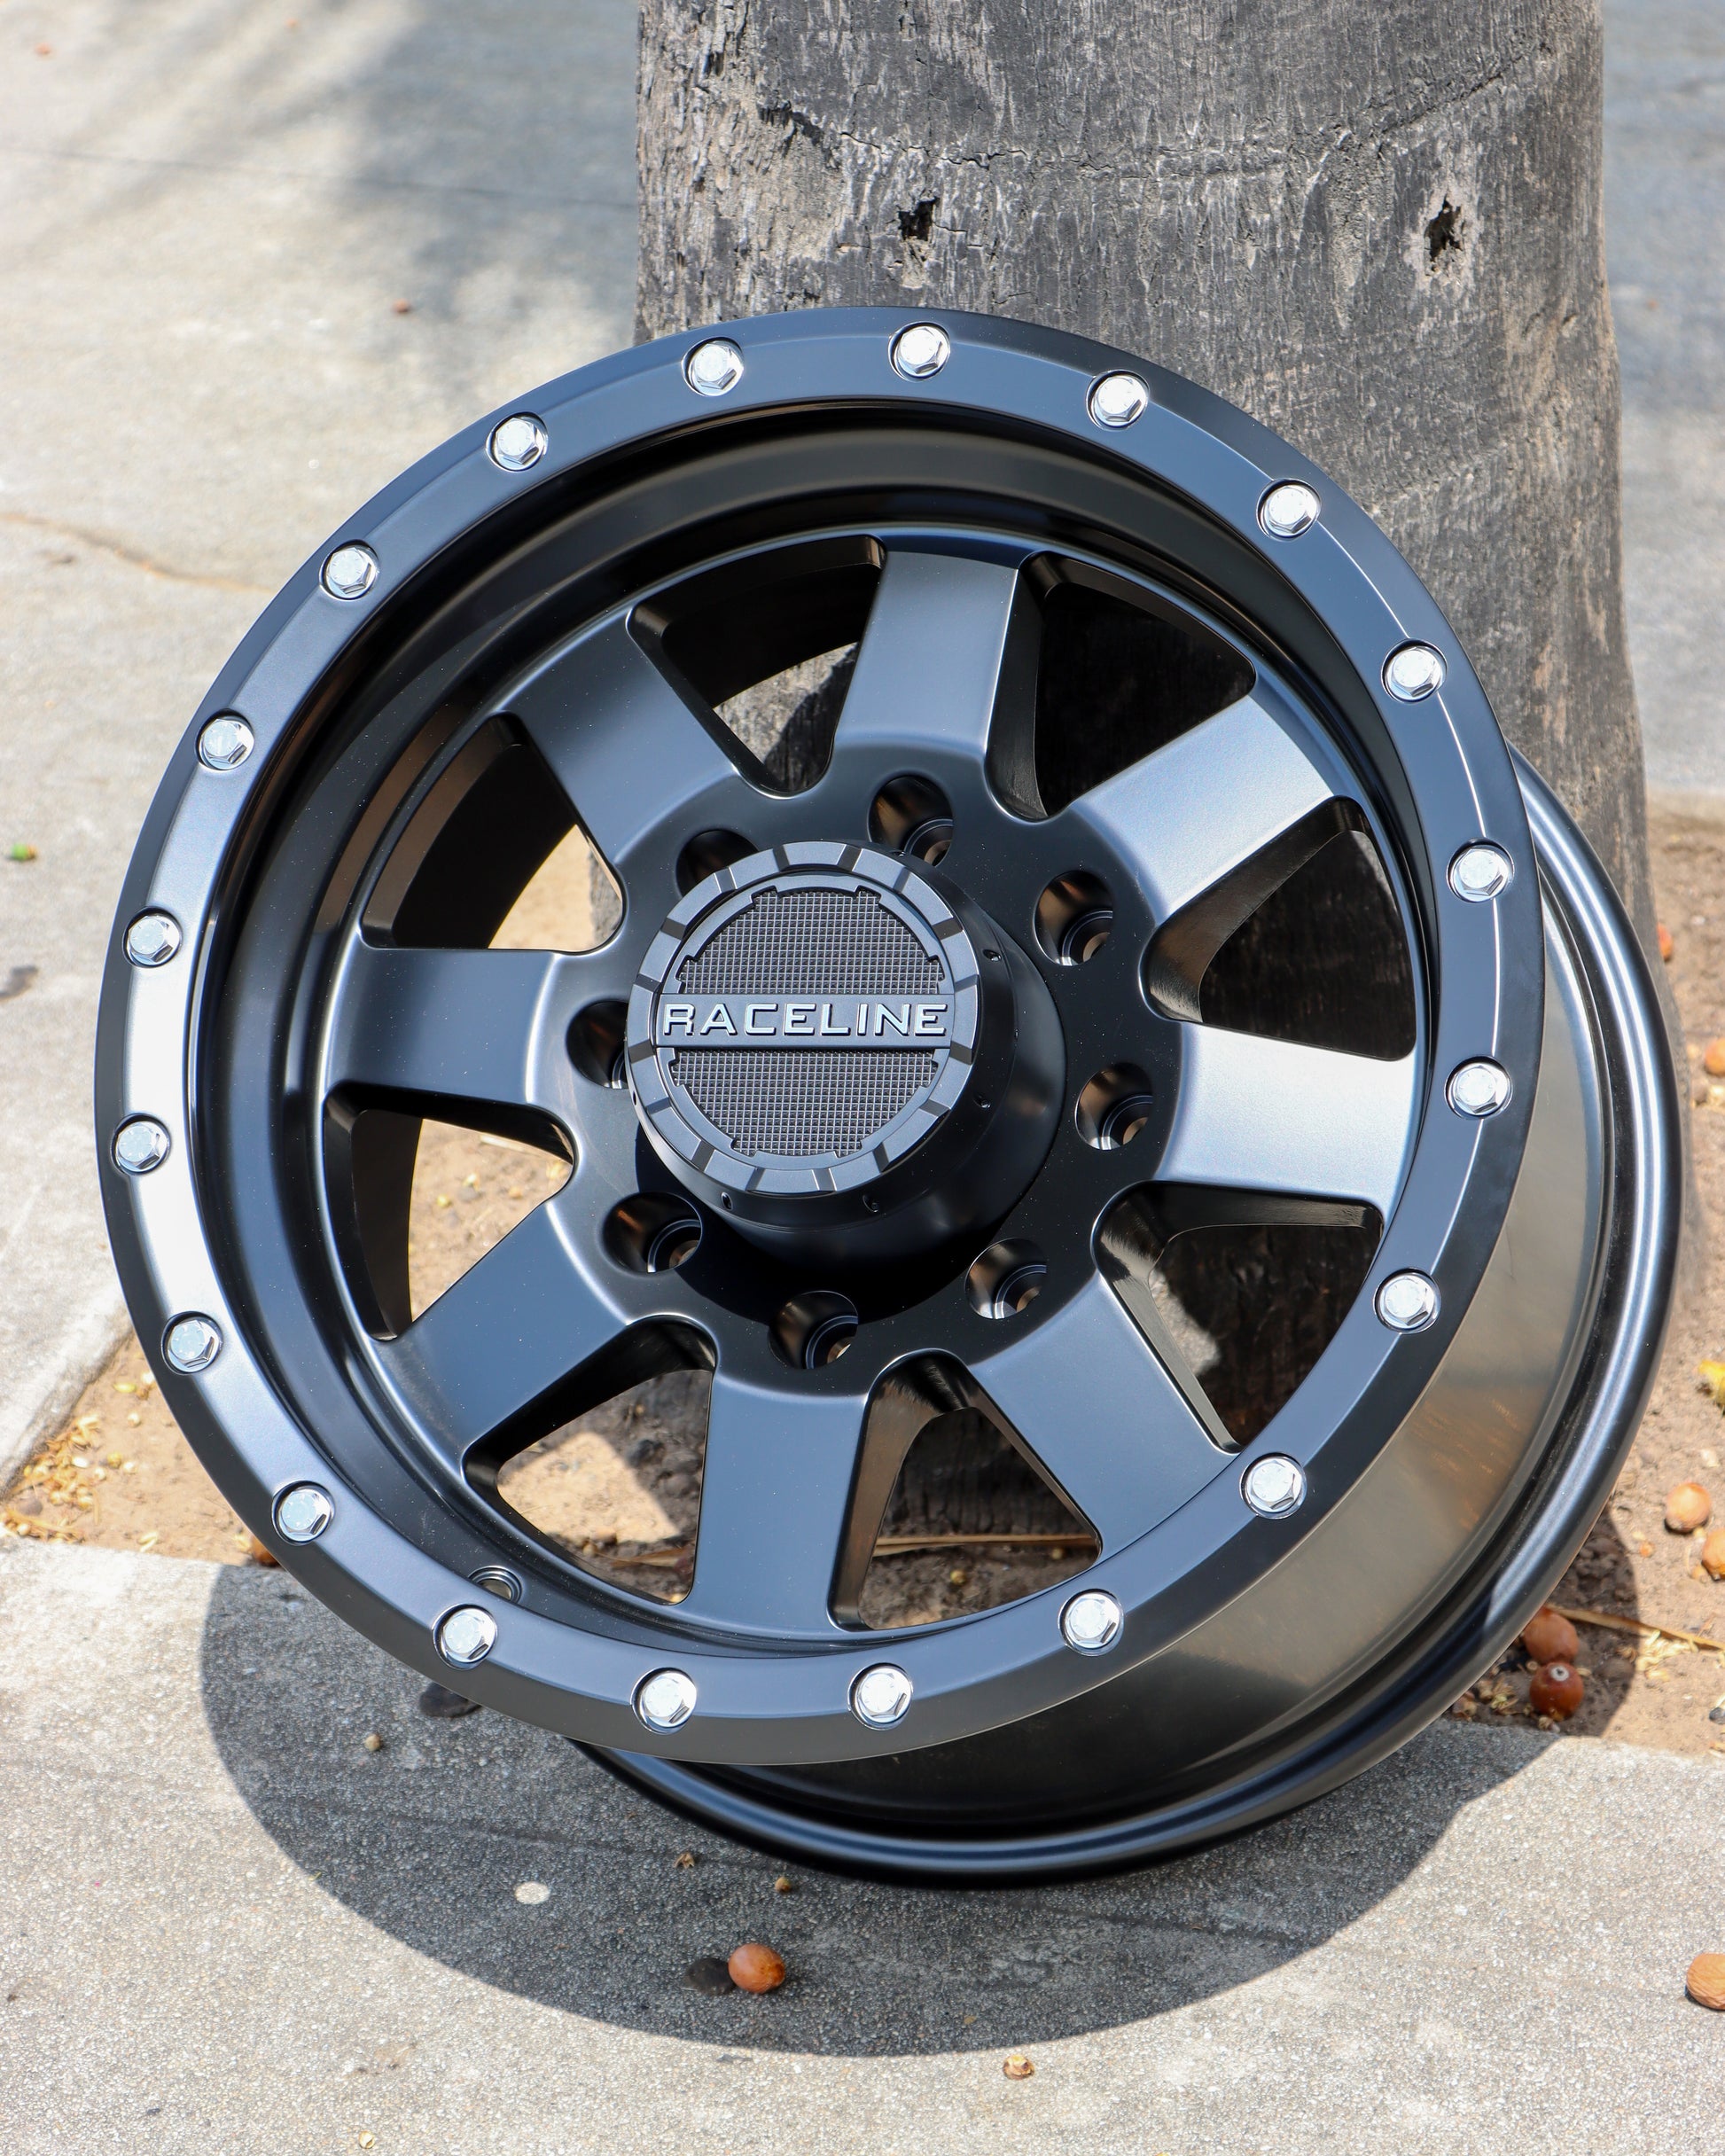 Raceline Defender wheel in a matte black finish leaning up against a palm tree.